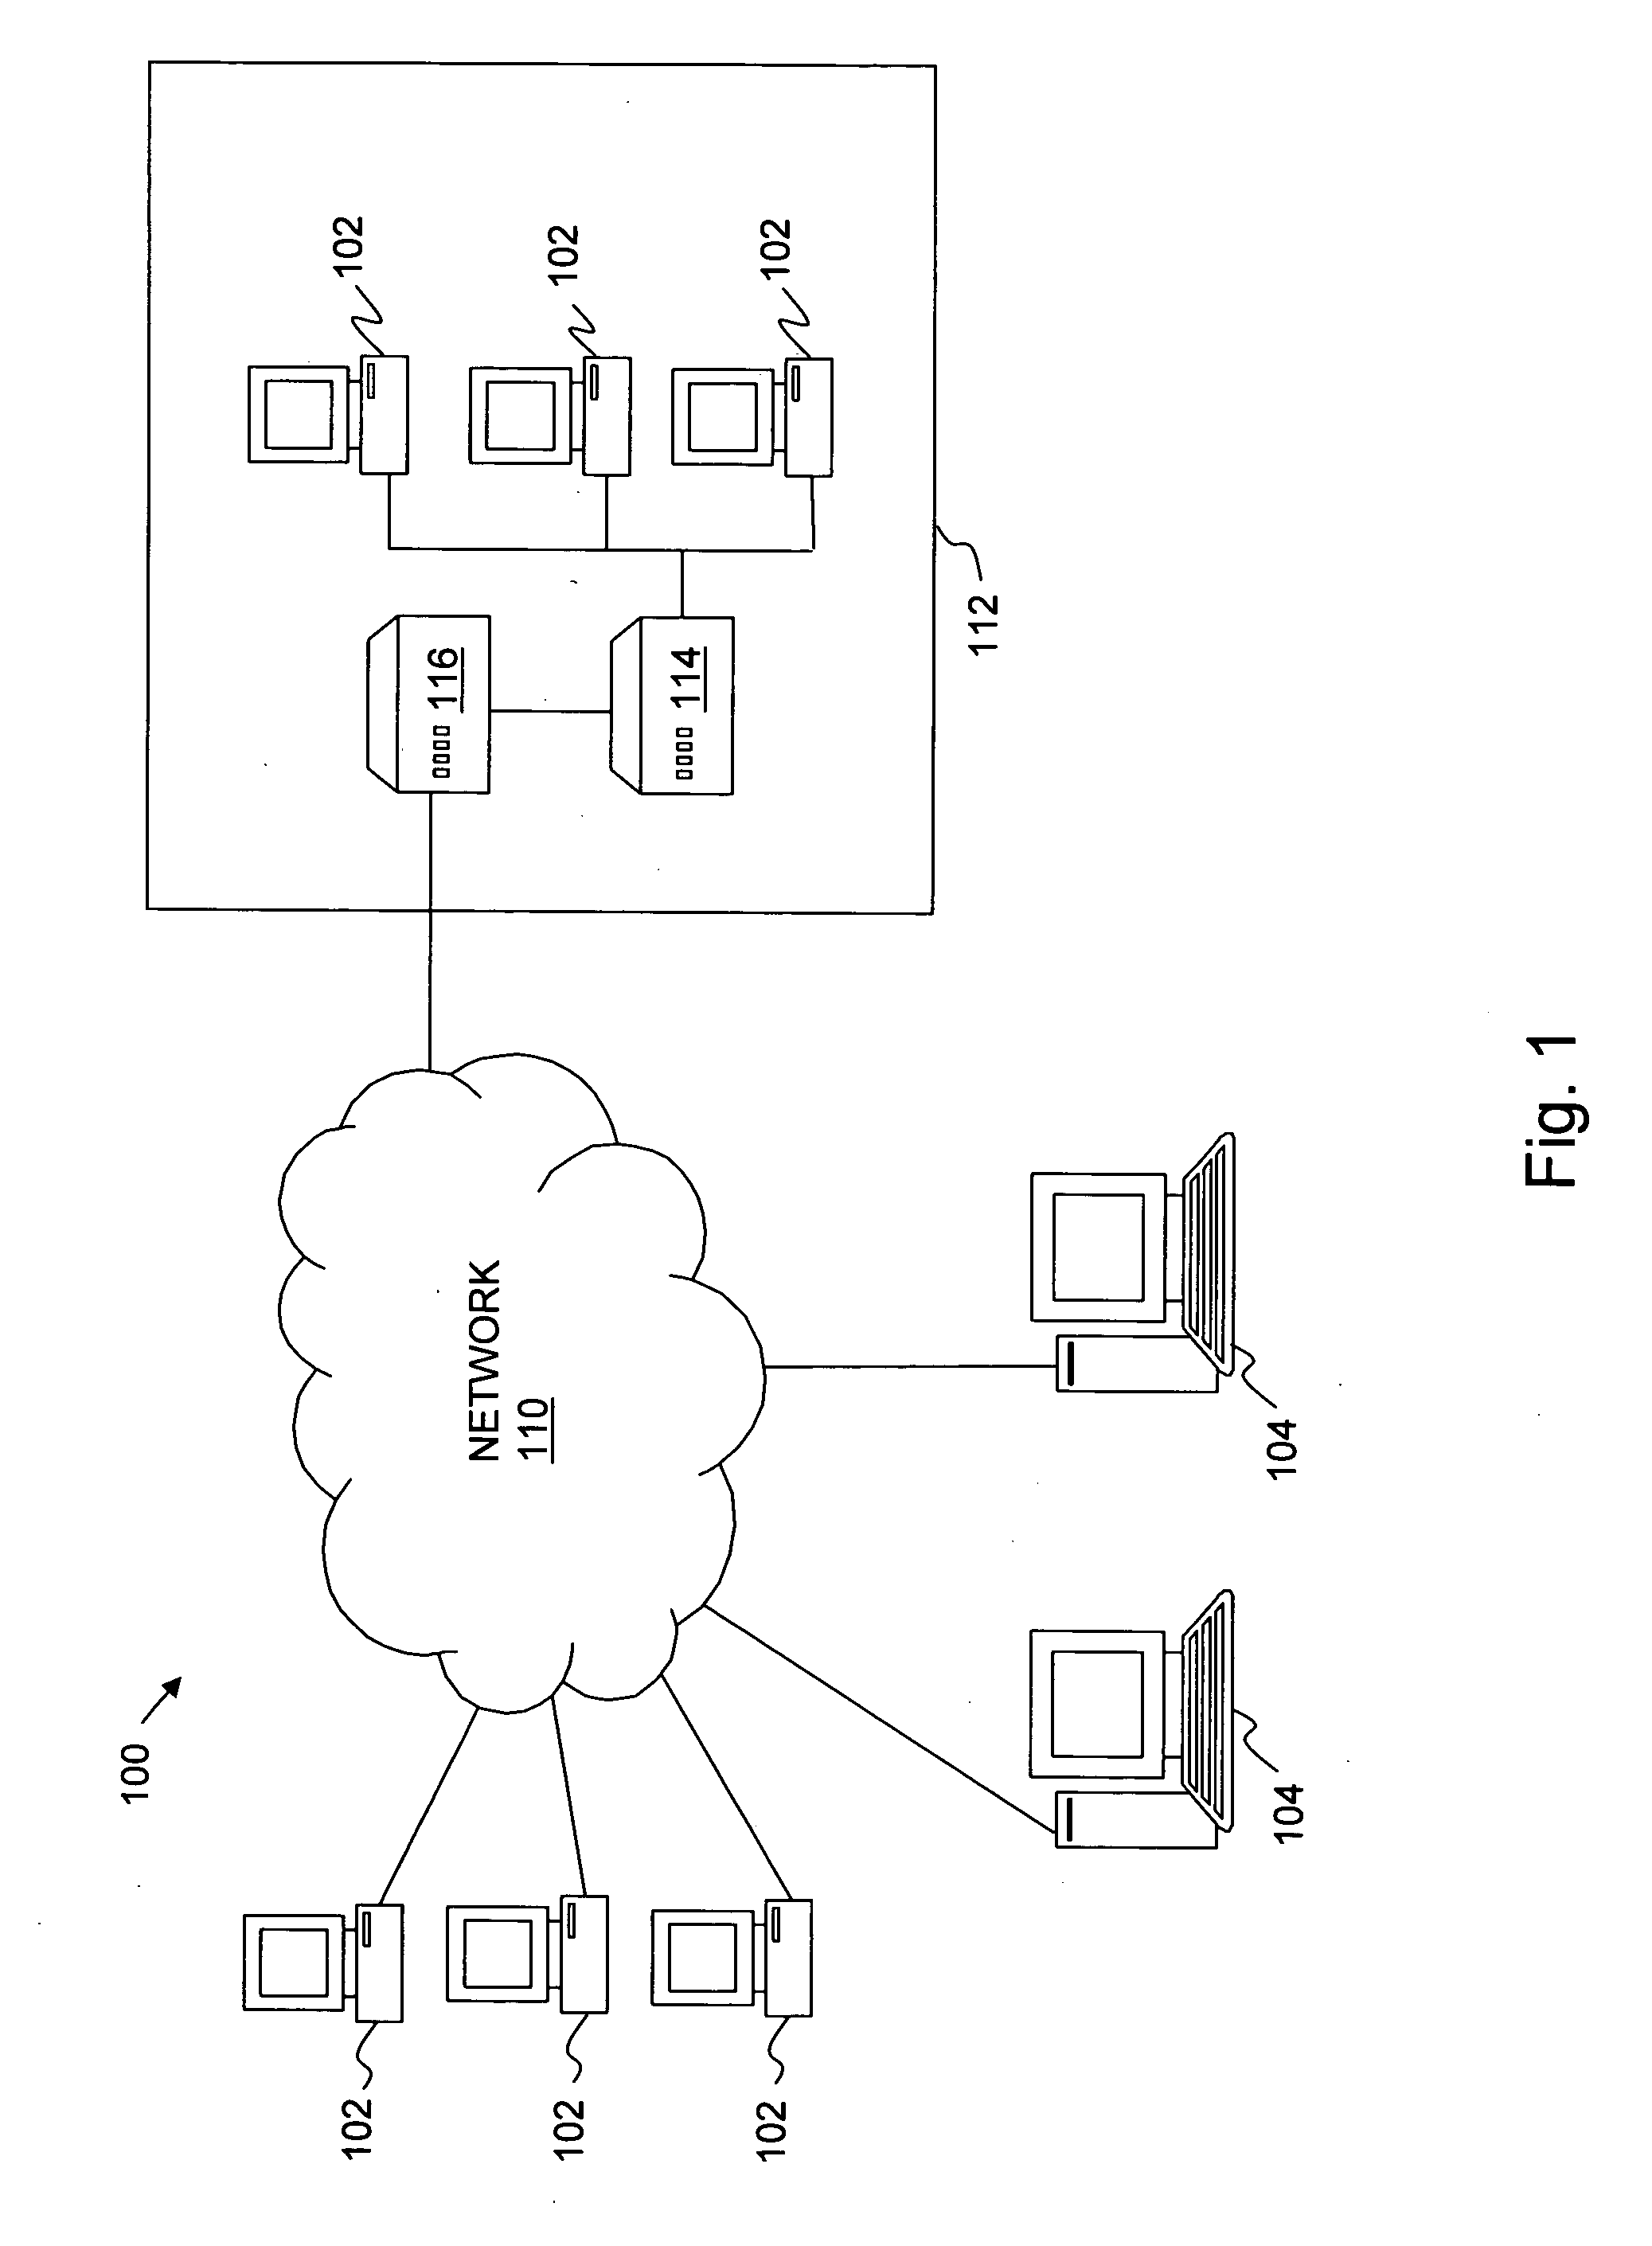 Systems and methods for use of structured and unstructured distributed data